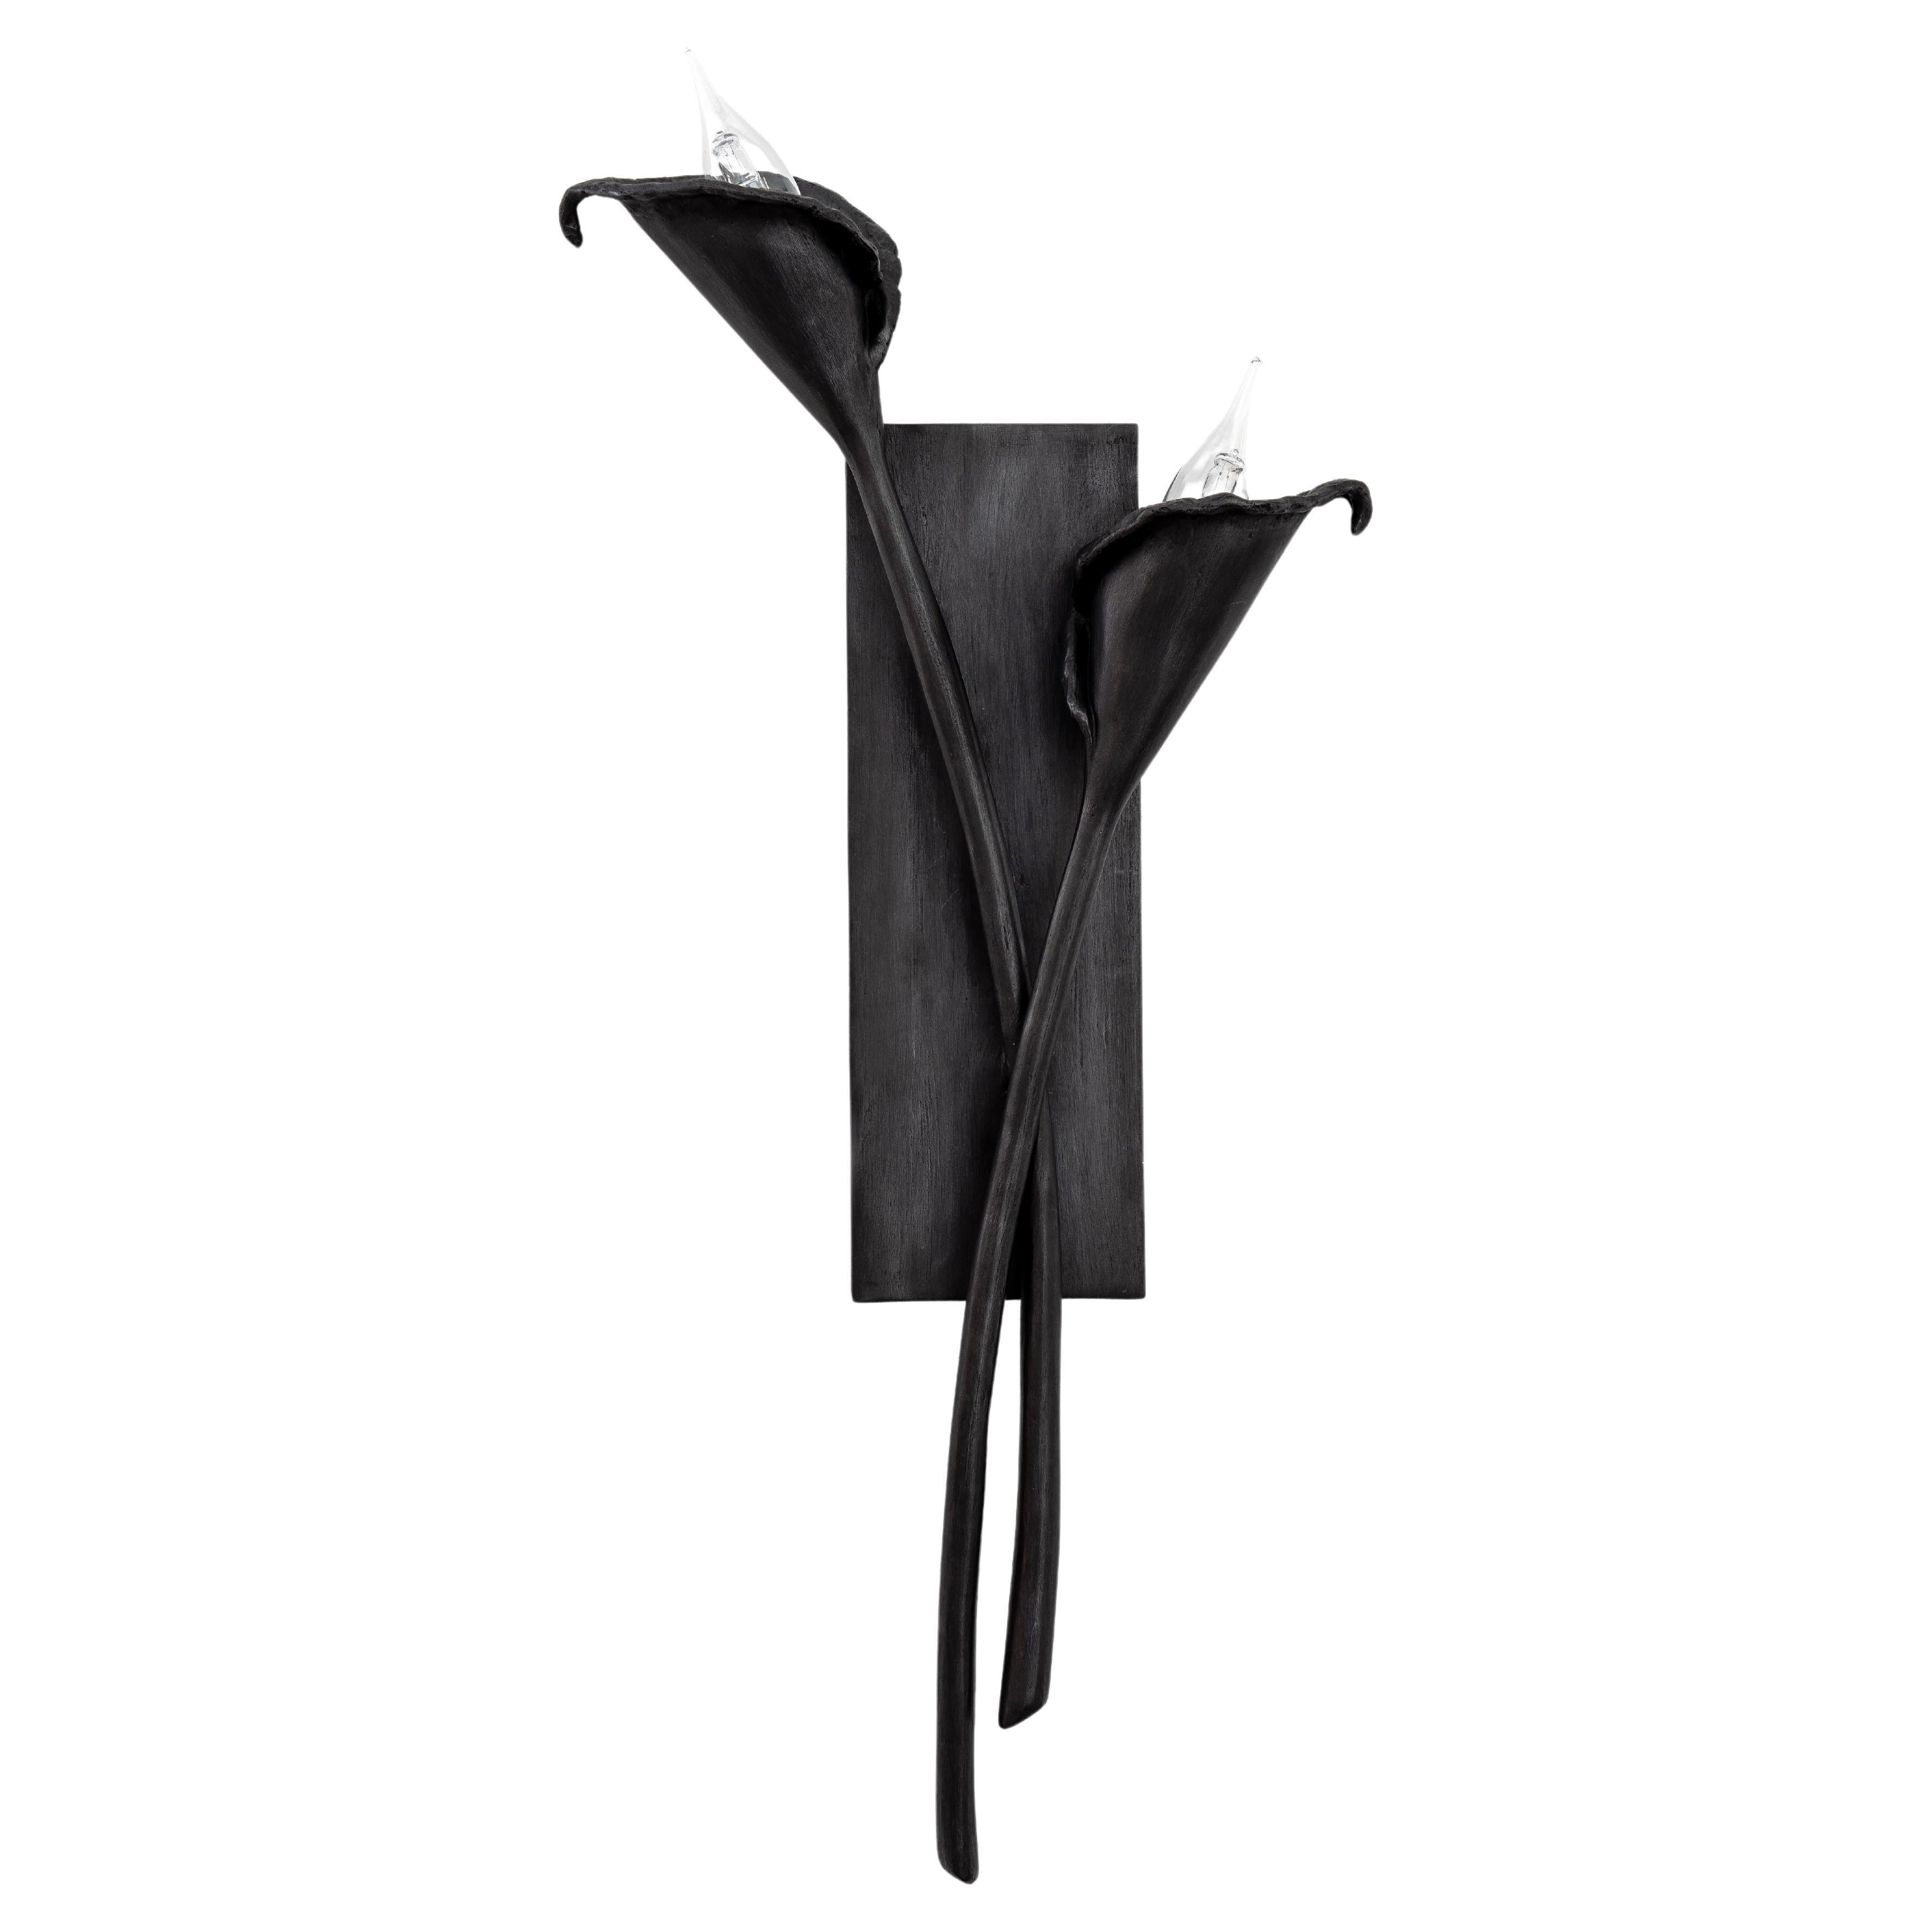 Calla Lily Contemporary Wall Sconce, Wall Light in Black Plaster, Pair, Benediko